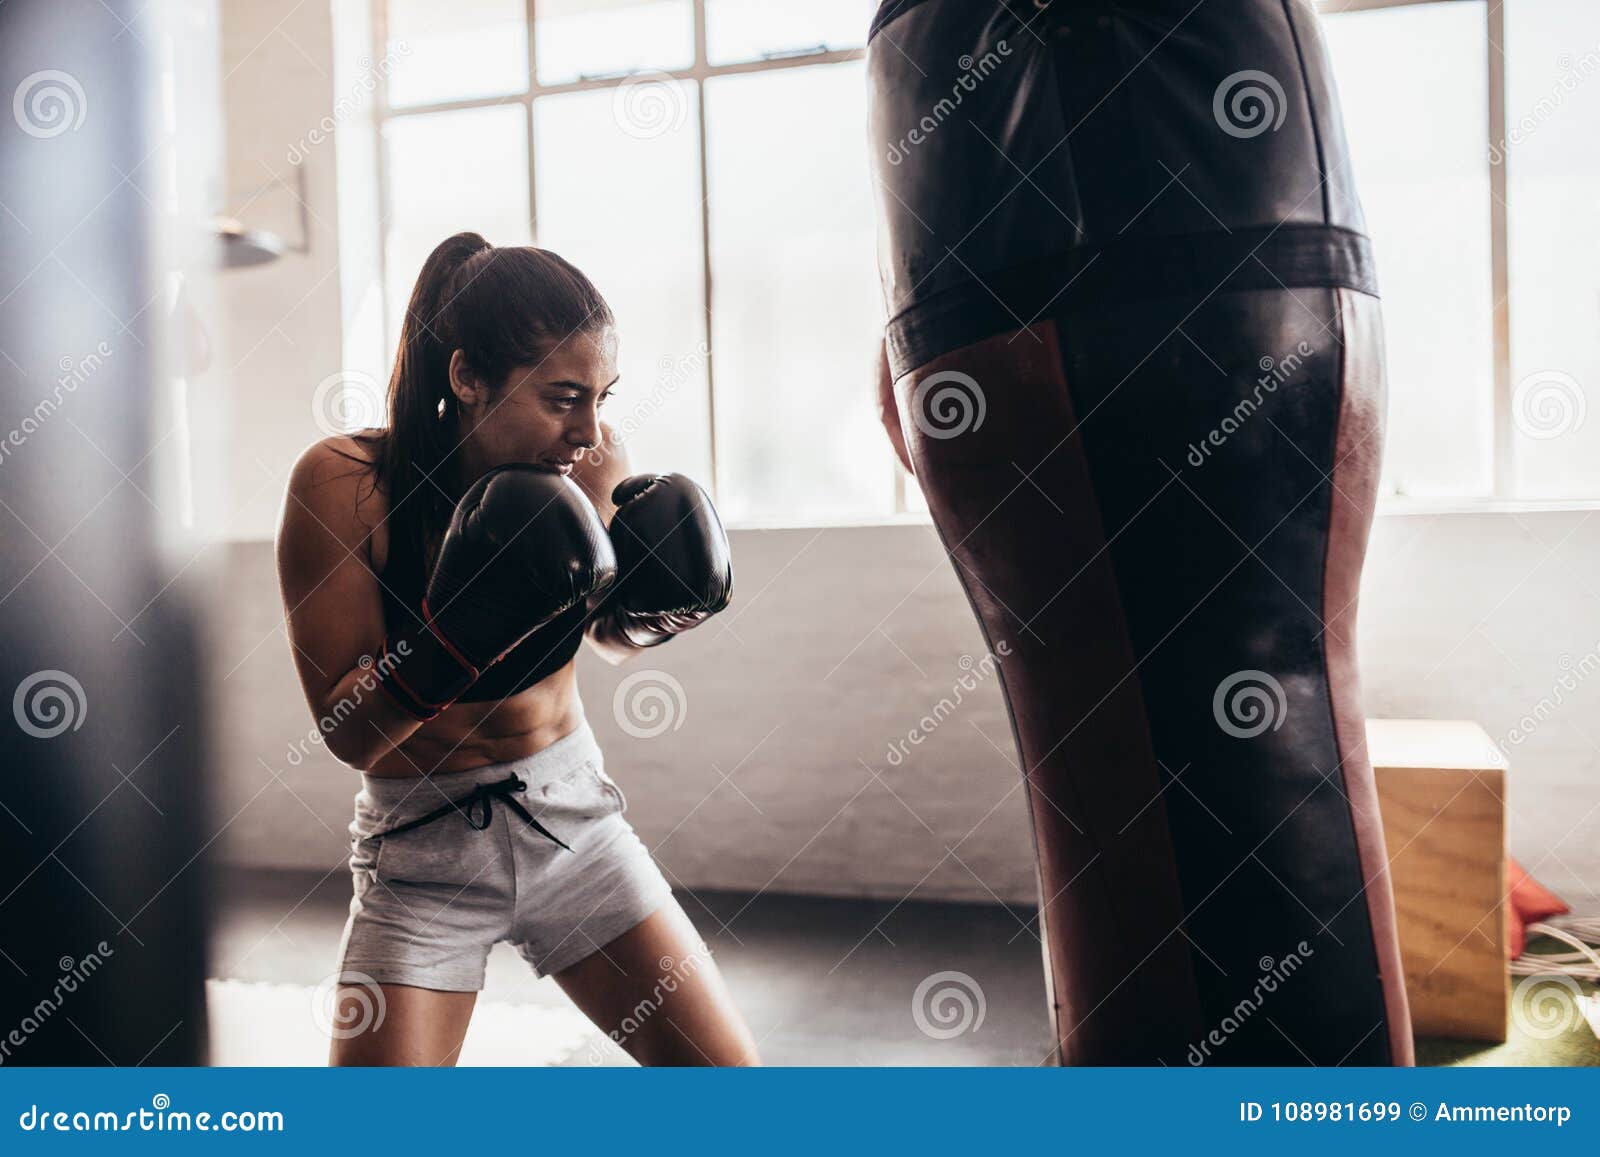 10 Best Places To Learn Muay Thai In Hong Kong - The HK HUB